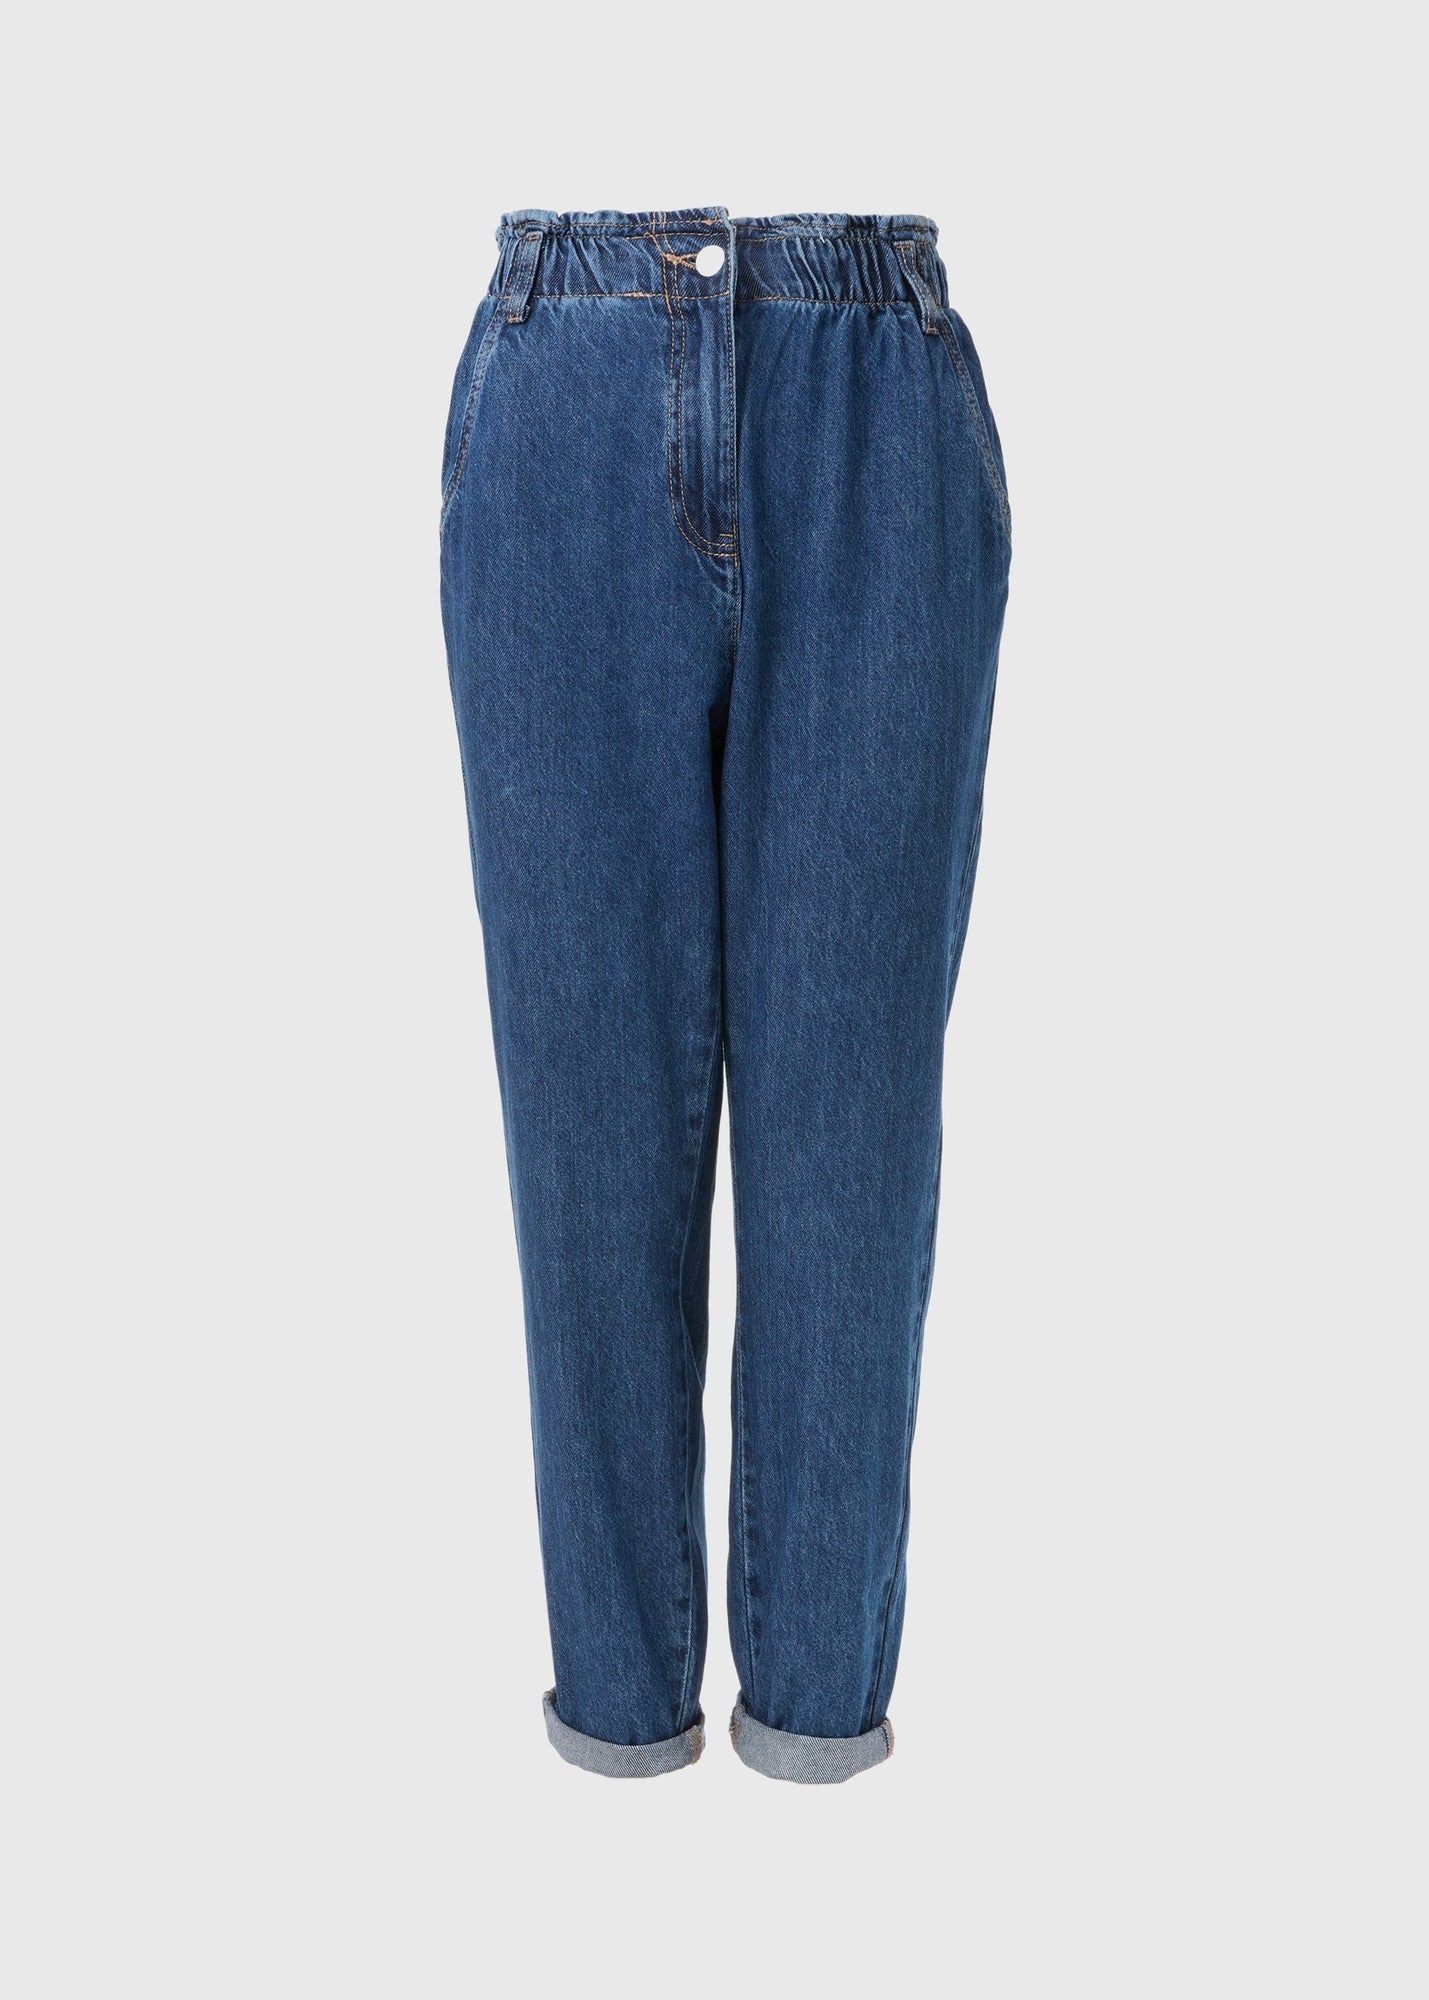 Buy Matalan Women's Jeans & Jeggings at Lowest Price in UAE